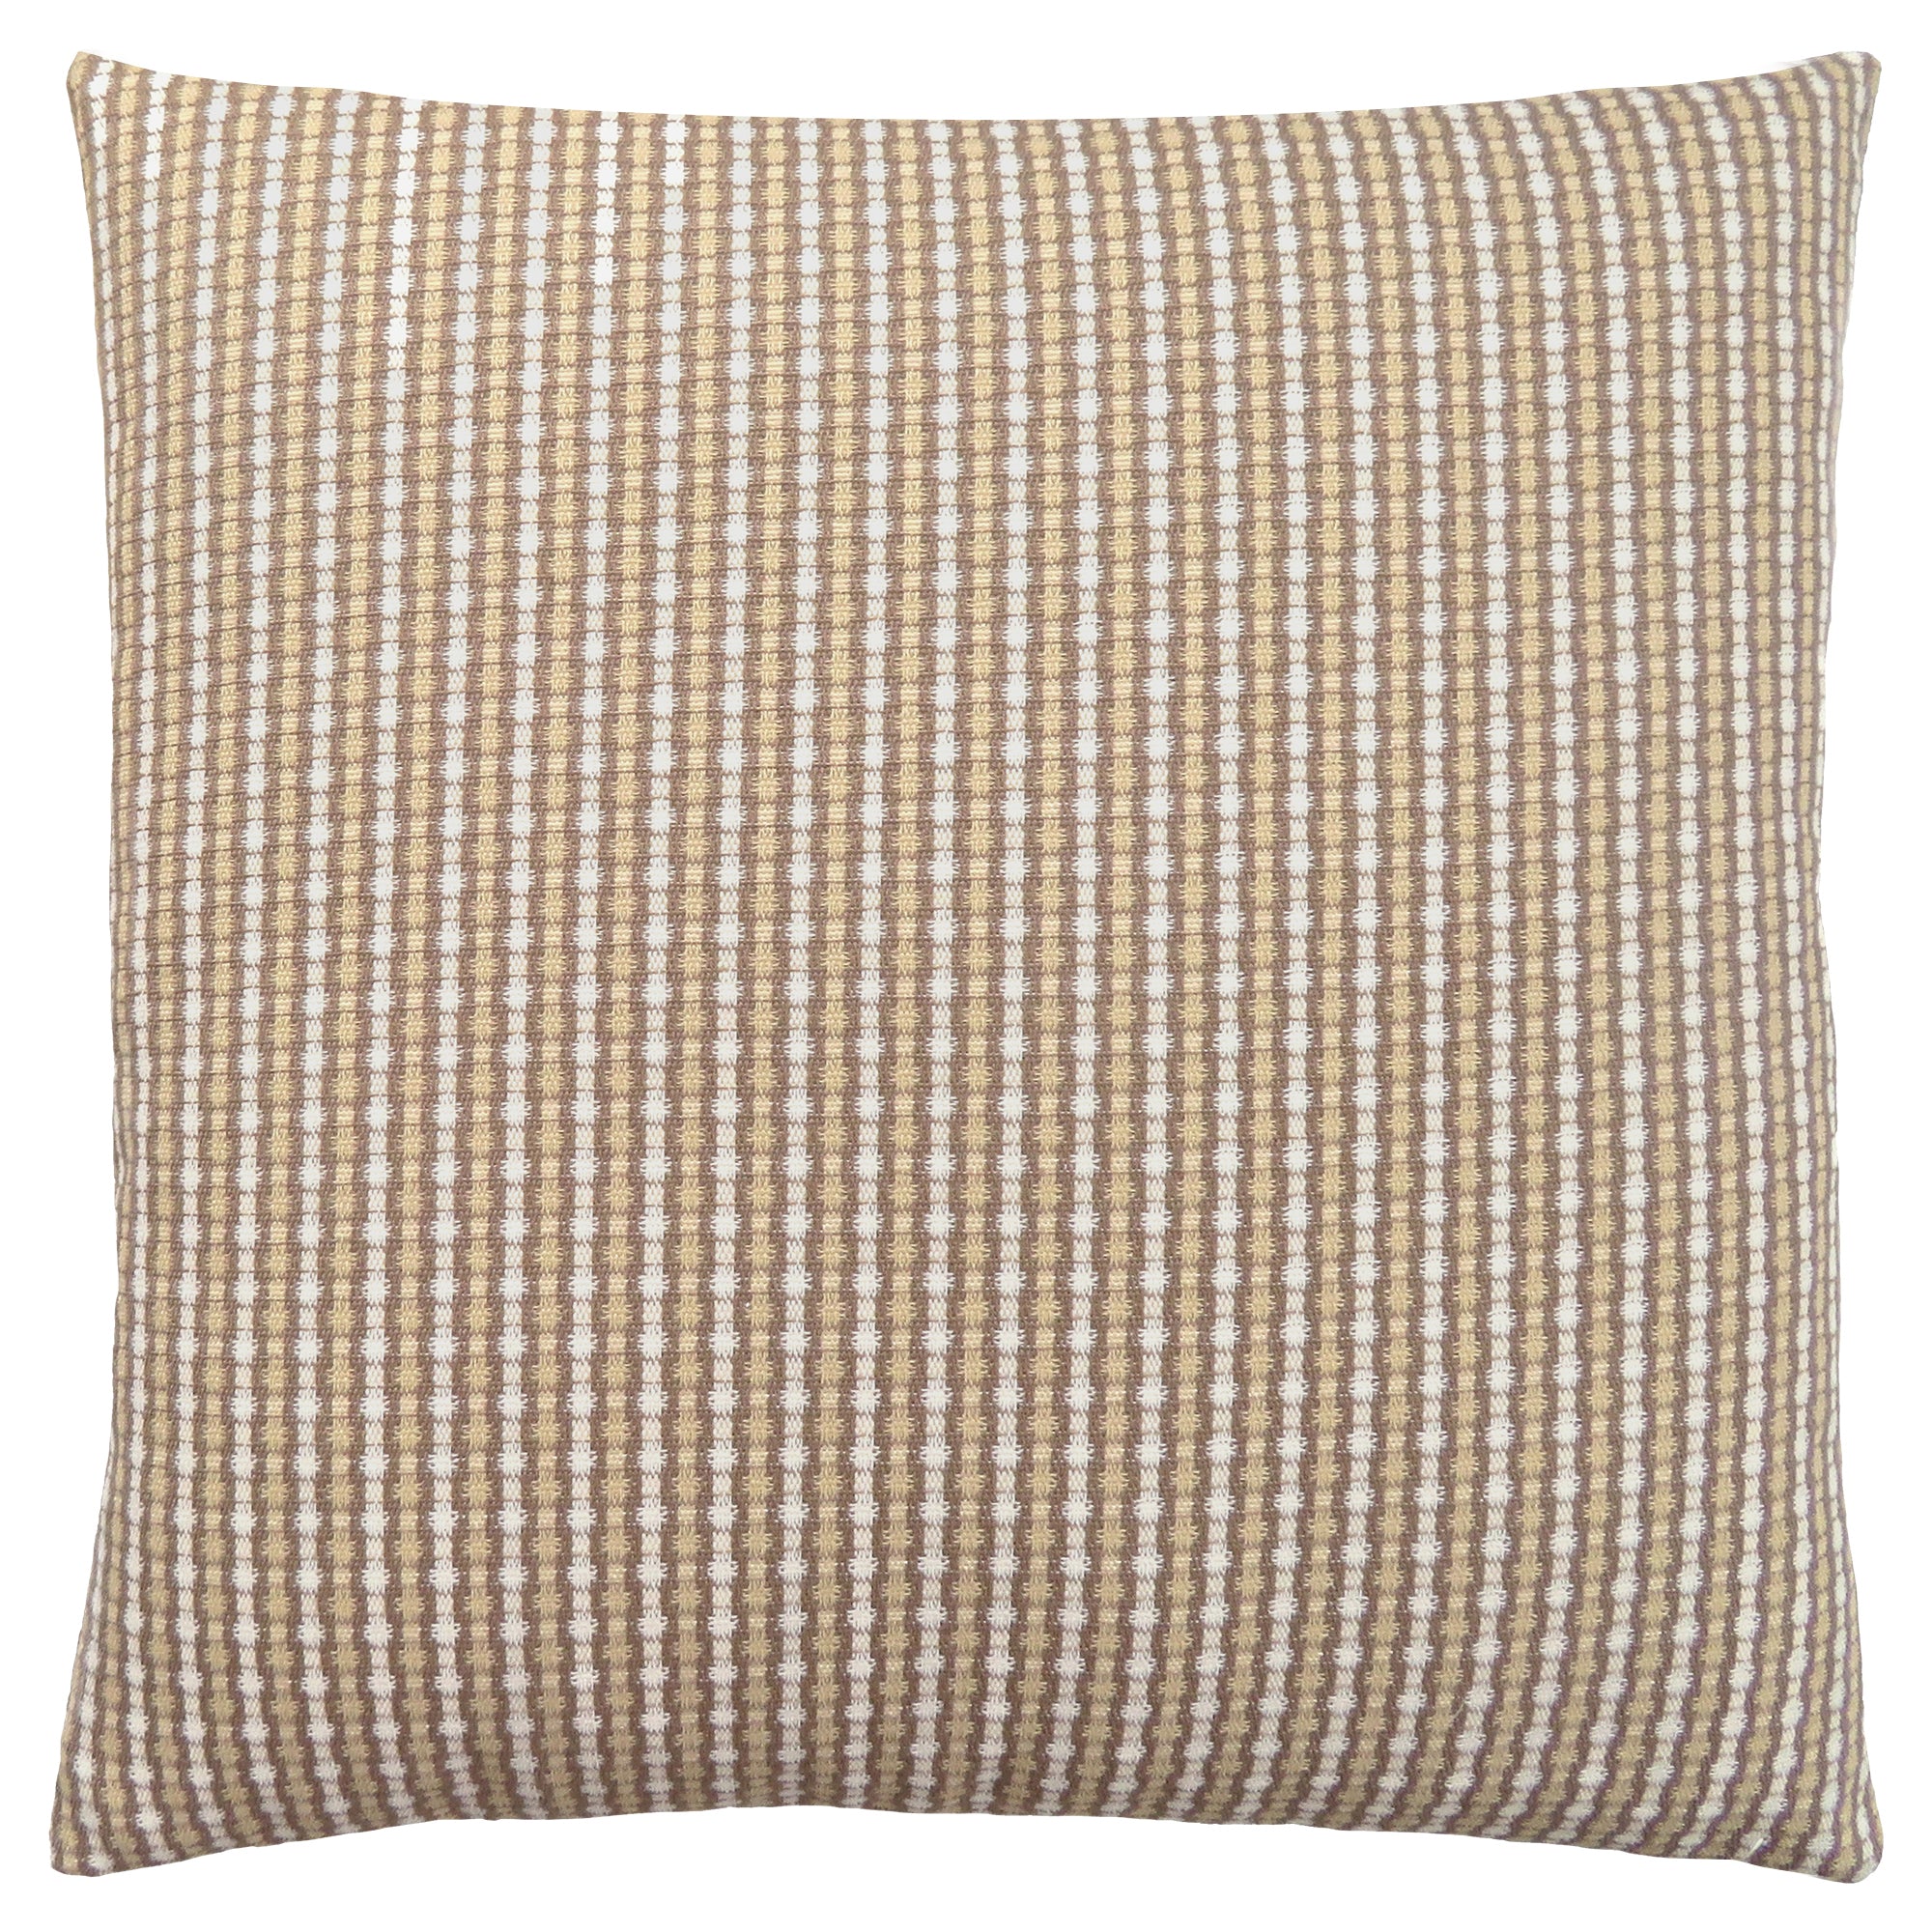 MN-409228    Pillows, 18 X 18 Square, Insert Included, Decorative Throw, Accent, Sofa, Couch, Bed, Soft Polyester Woven Fabric, Hypoallergenic Soft Polyester Insert, Light And Dark Taupe, Abstract Dot Design, Classic Dot Design, Classic